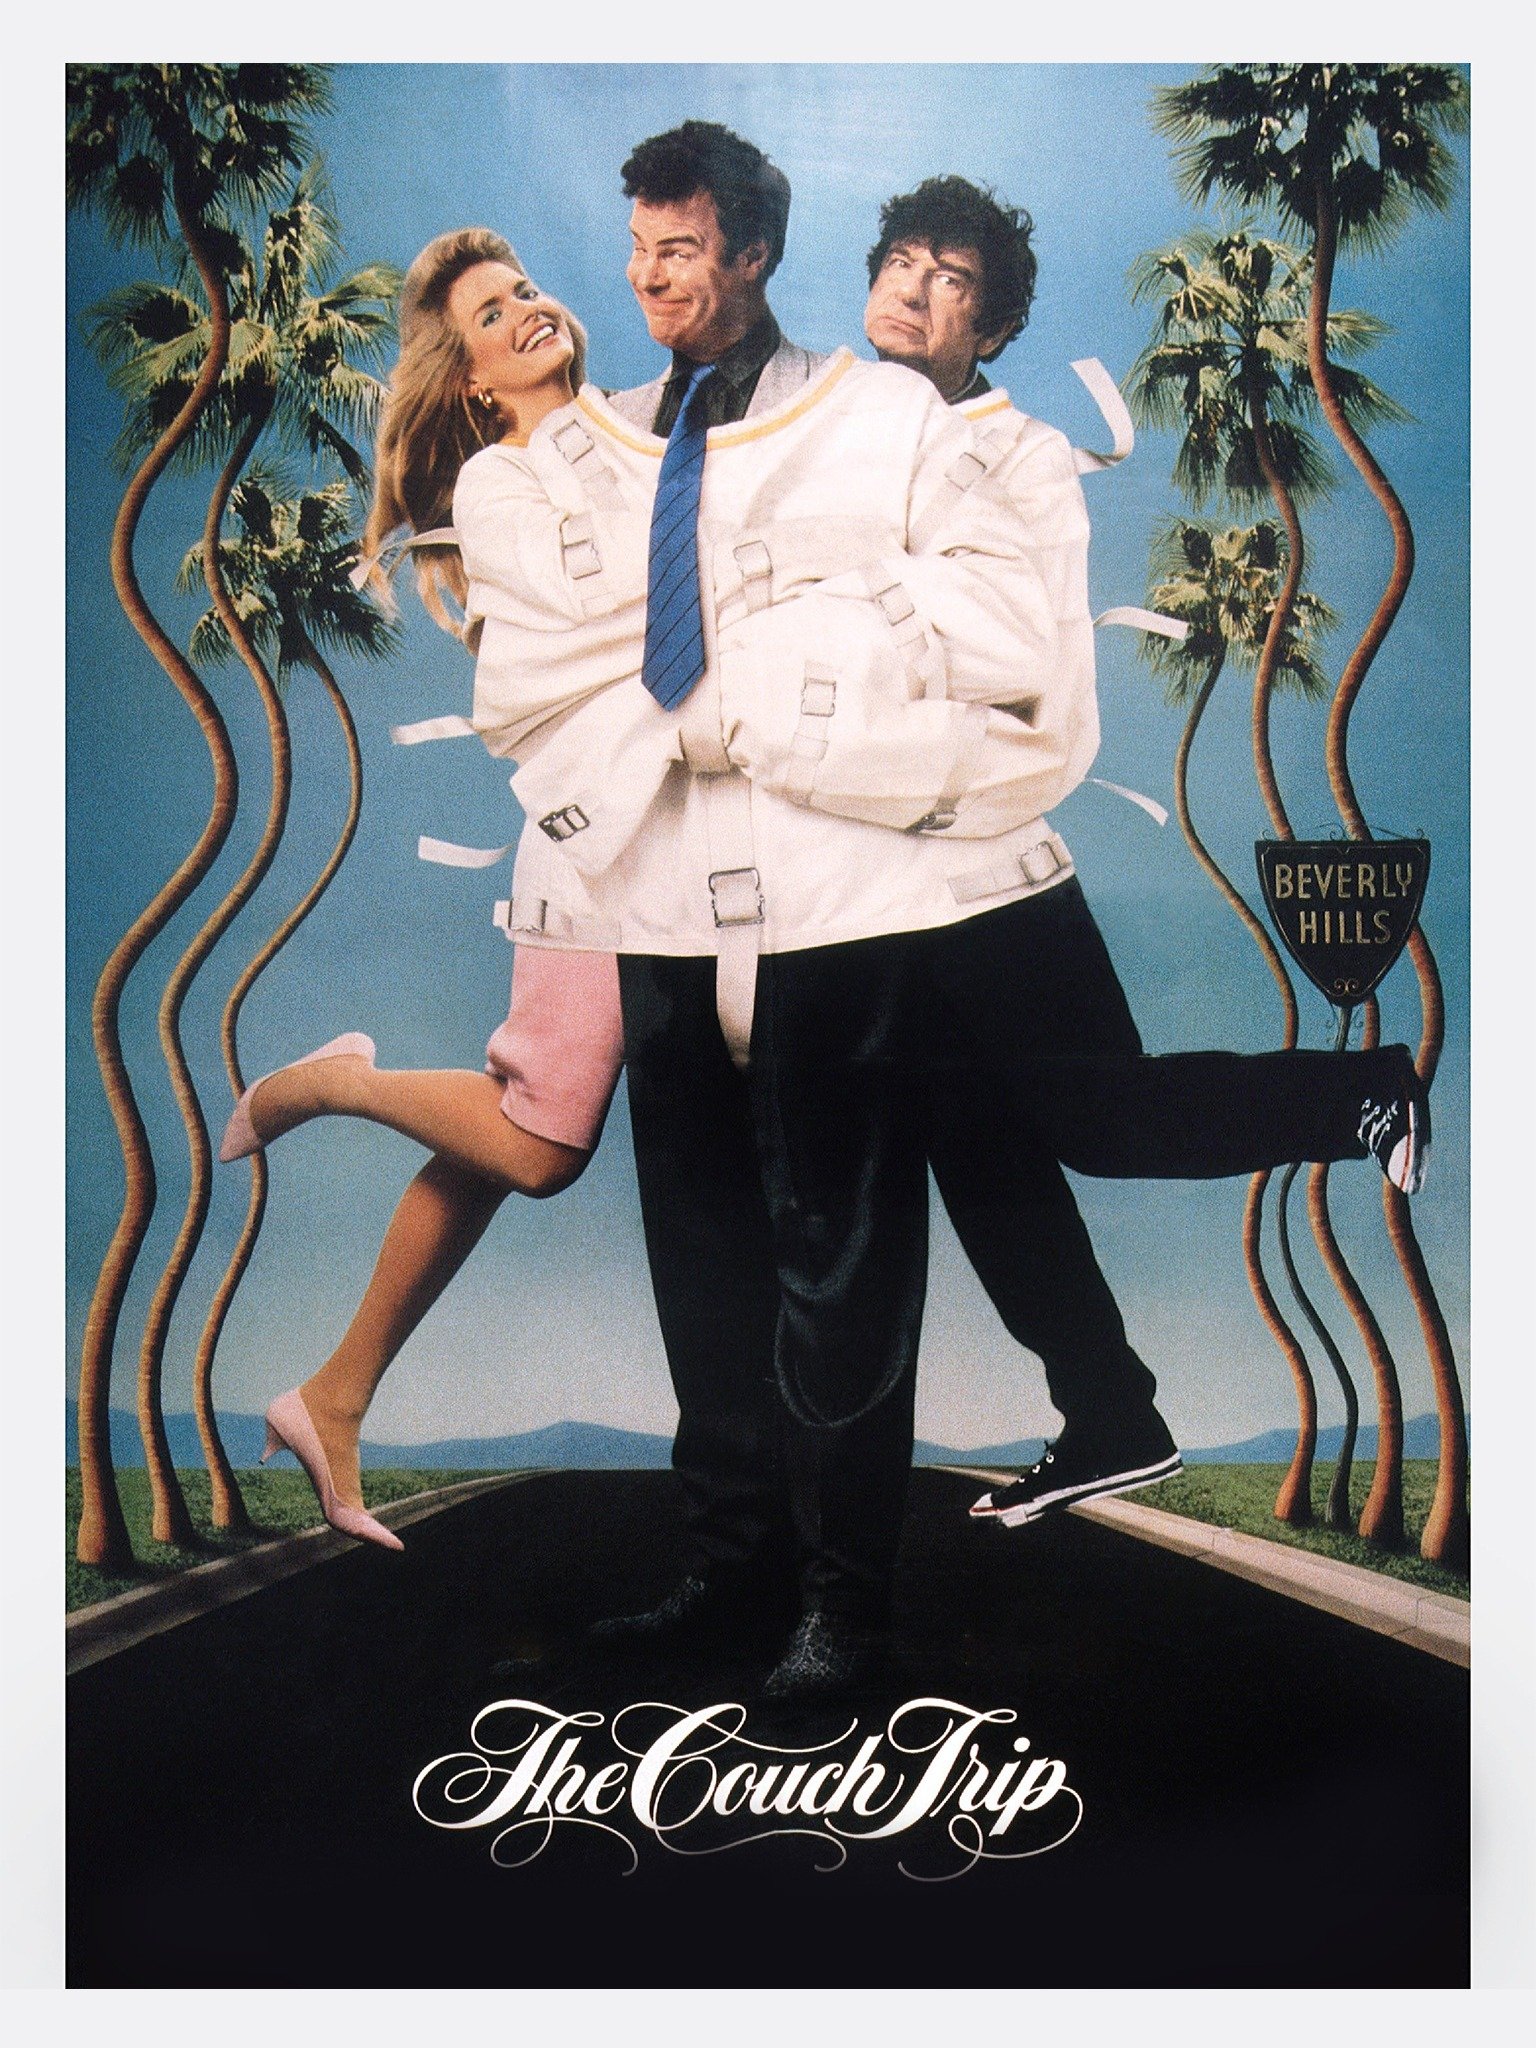 the couch trip movie cast